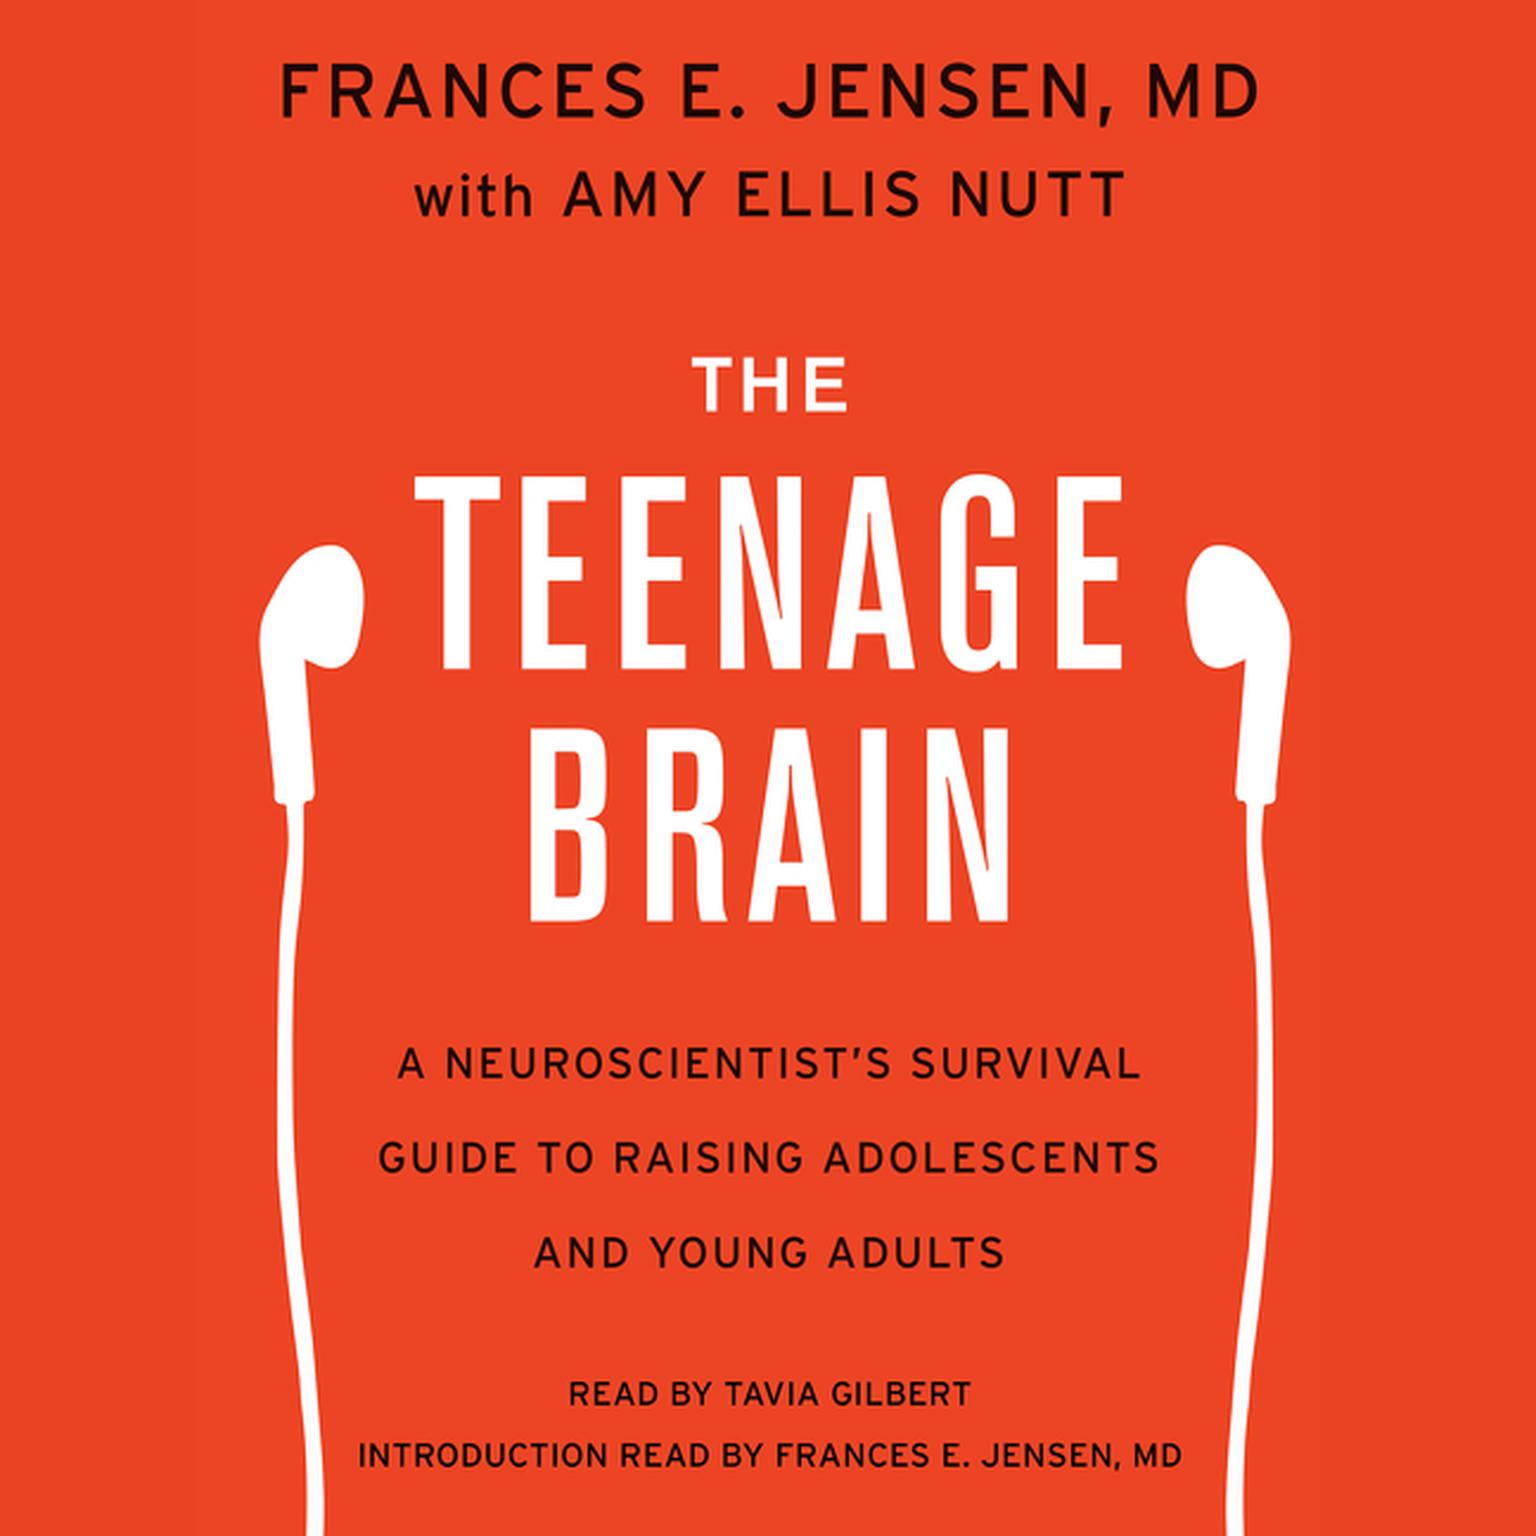 The Teenage Brain: A Neuroscientists Survival Guide to Raising Adolescents and Young Adults Audiobook, by Frances E. Jensen